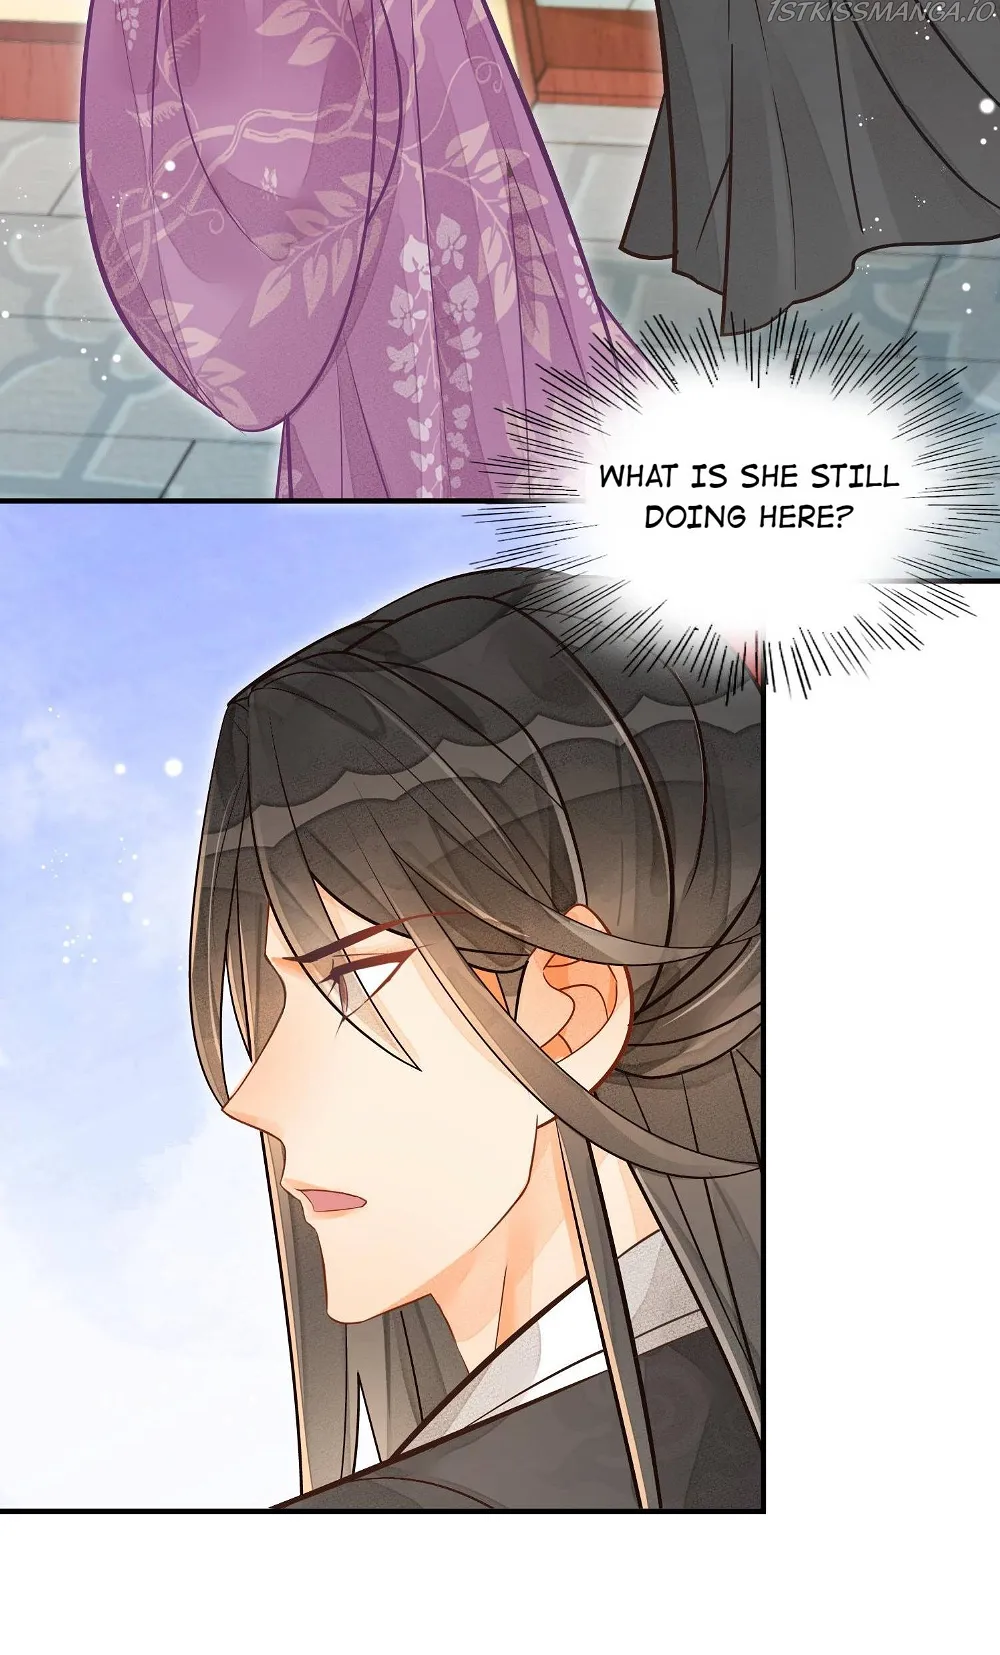 A Concubine’s Daughter and Her Tactics chapter 12